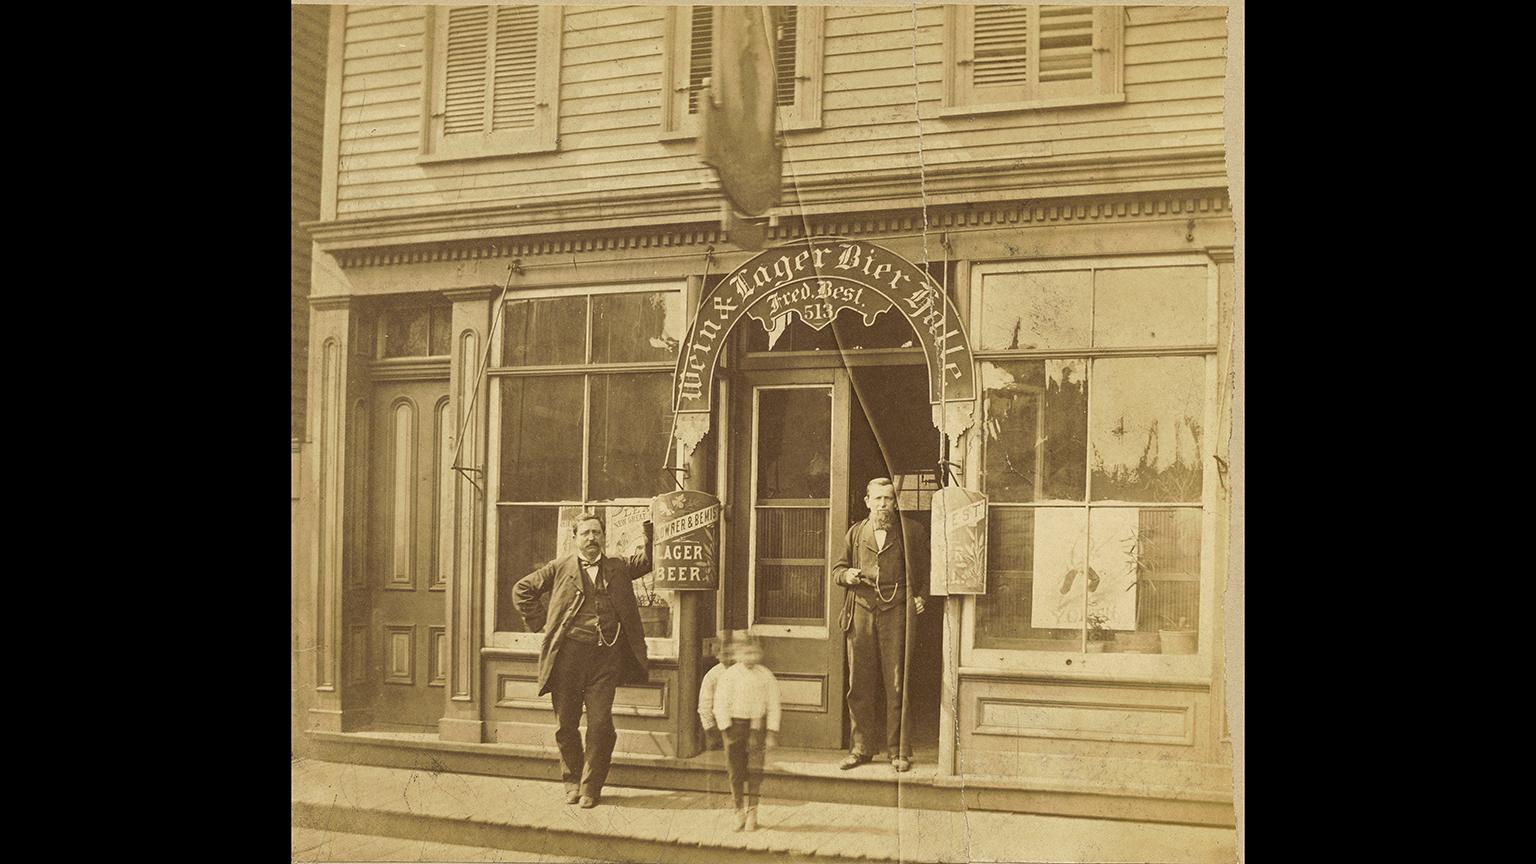 The Wein & Lager Bier Halle, once located at 513 S. Halsted St. served up wine and beer for German immigrants from 1880 to 1885. (Chicago History Museum)